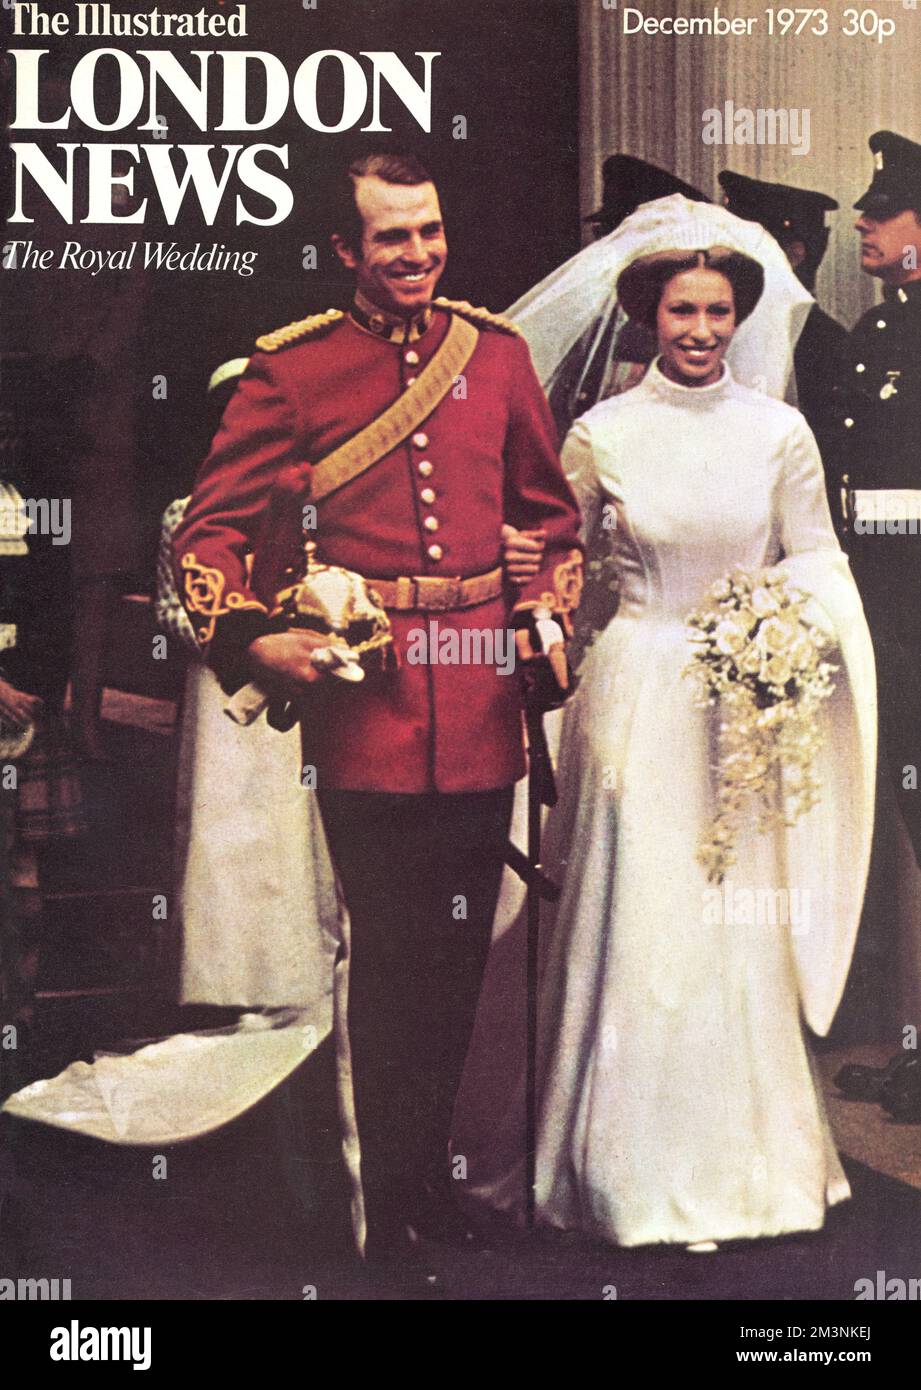 Front cover of The Illustrated London News, November 1973 featuring the royal wedding of that year when Princess Anne married Captain Mark Phillips at Westminster Abbey on 14 November.     Date: 1973 Stock Photo